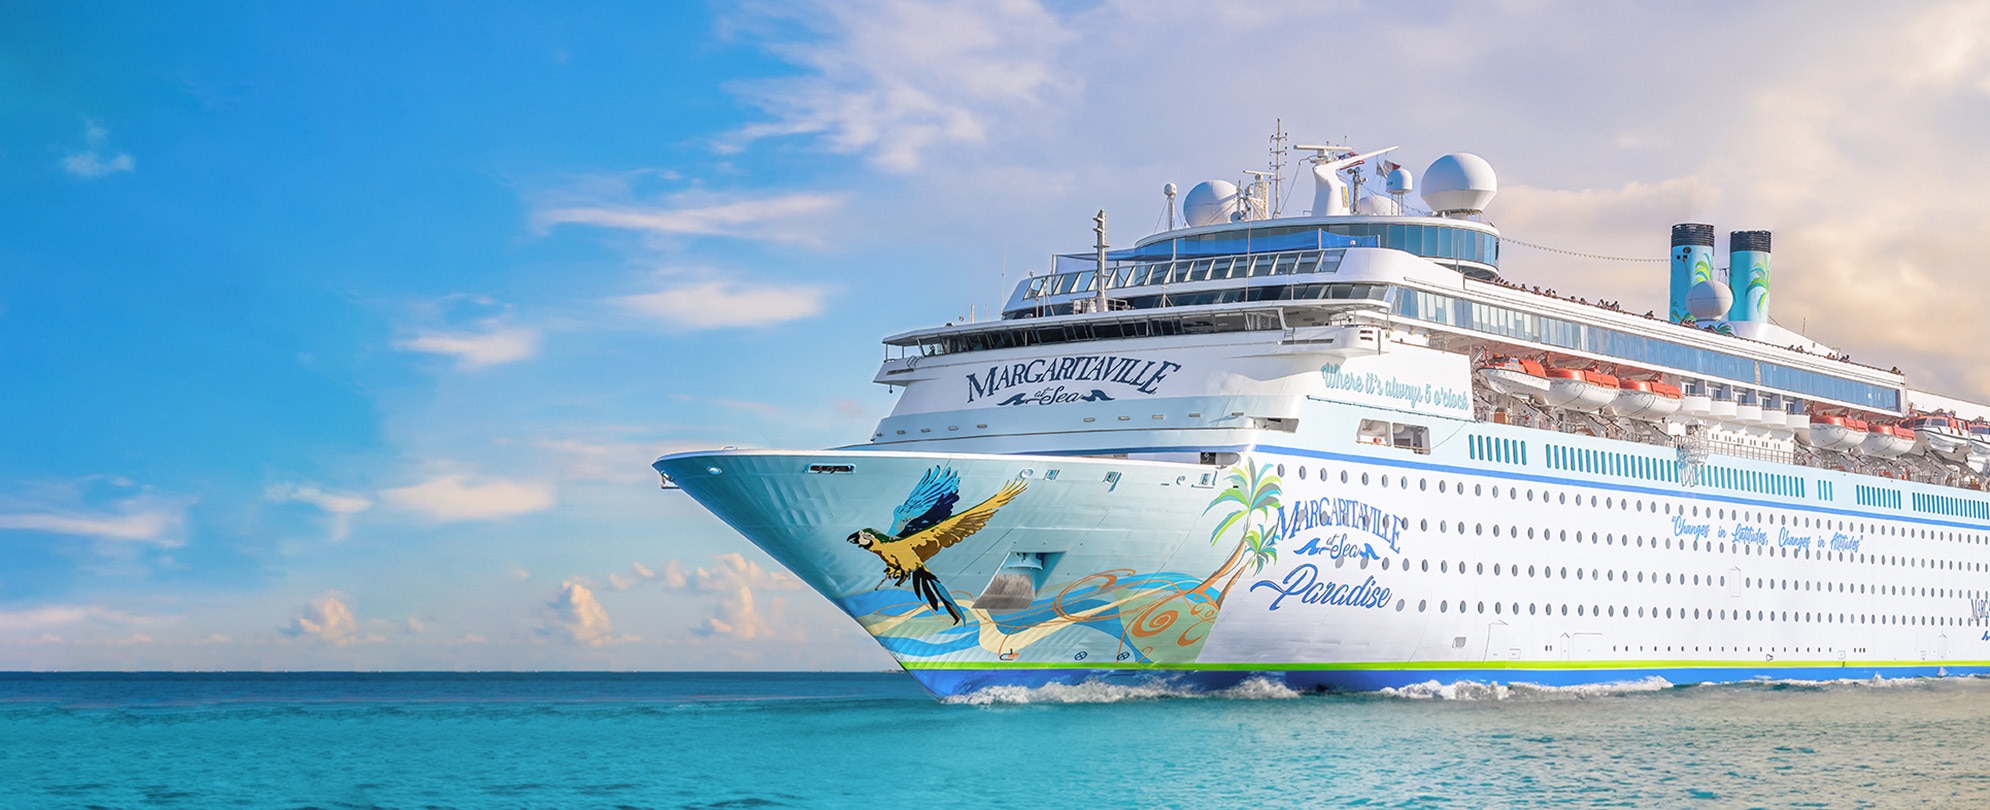 Image of Margaritaville at Sea Paradise cruise ship sailing in the ocean